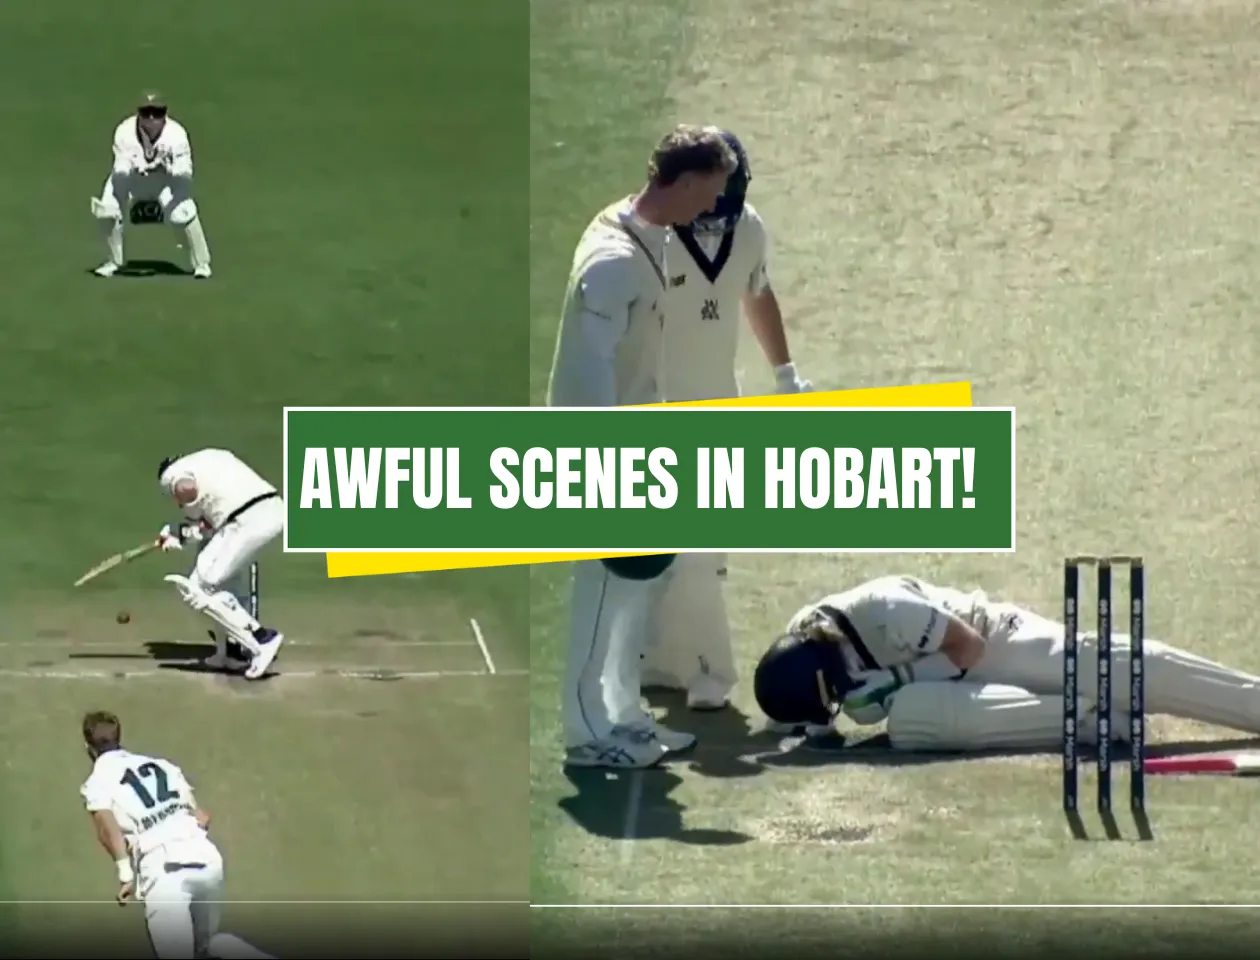 WATCH: Australia's Will Pucovski suffers concussion after deadly hit by bouncer in Sheffield Shield match